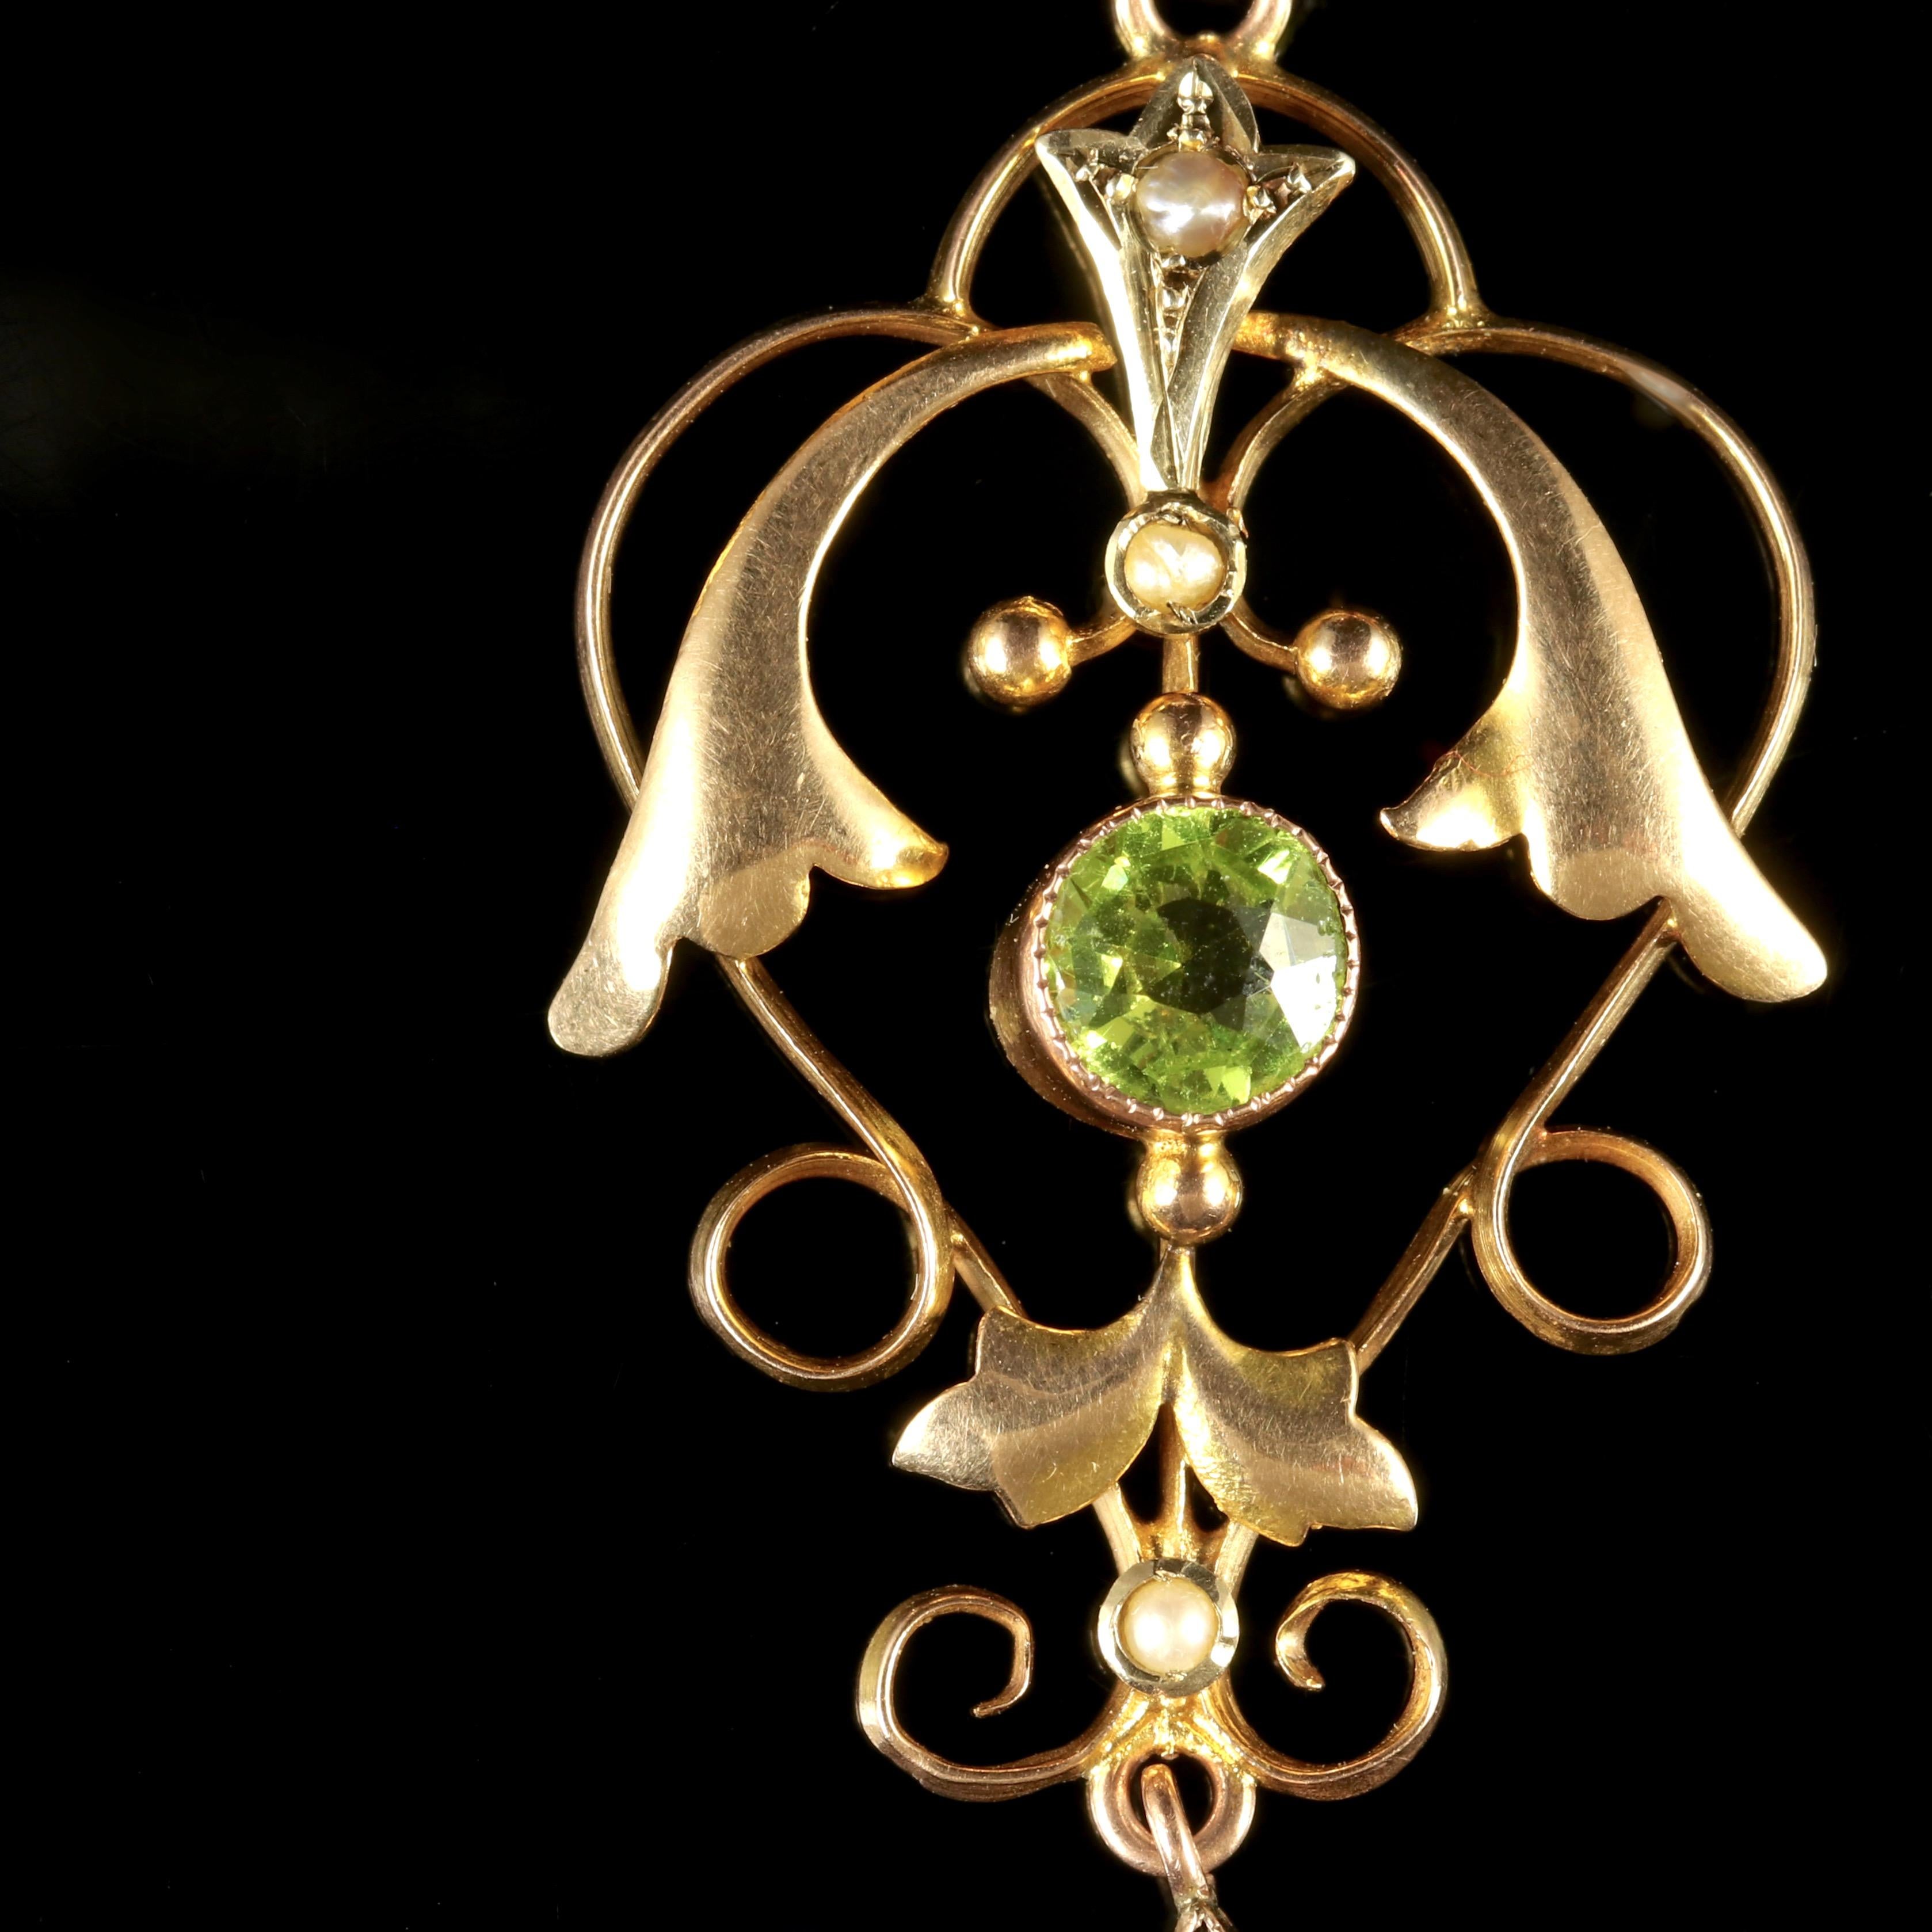 This elegant 9ct Victorian pendant is, Circa 1900.

The pendant is set with a lovely rich, olive green Peridot in the centre, and a pretty Peridot dropper.

The pendant is adorned with Pearls nestled in-between the floral like gallery.

The central